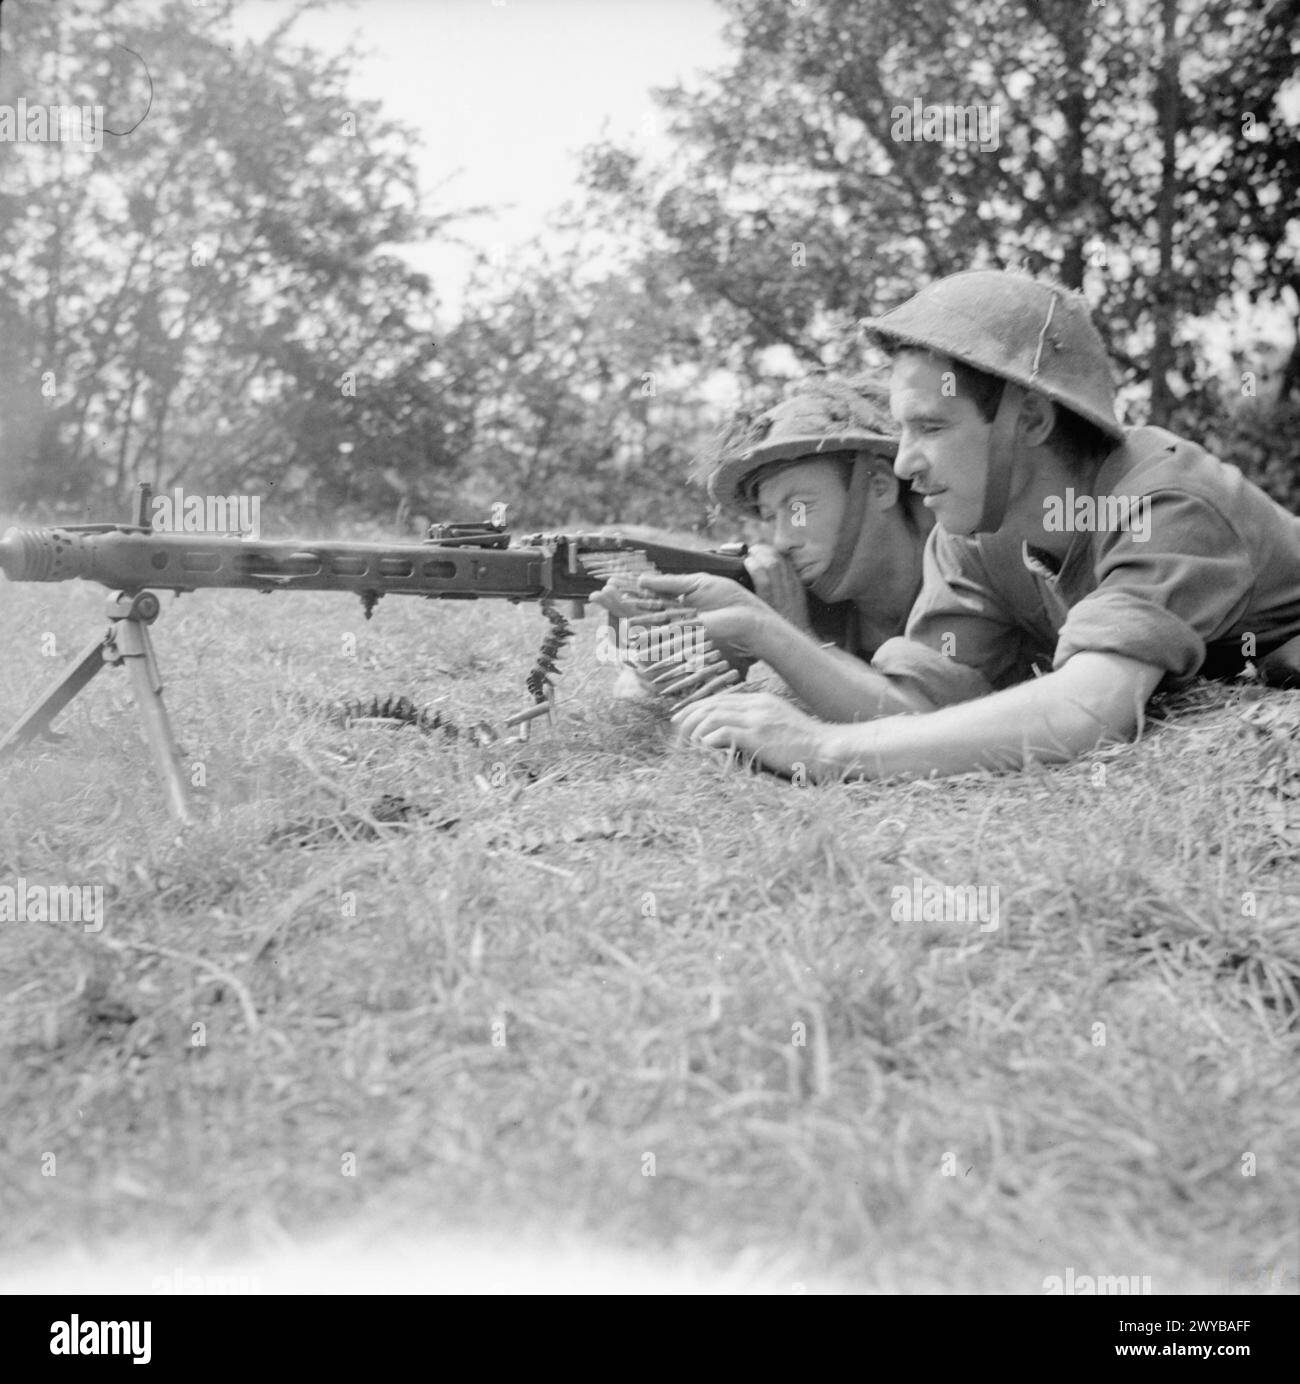 THE BRITISH ARMY IN NORMANDY 1944 - British troops fire a captured German MG42 machine gun during training at 59th Division's Battle School at Vienne En Bessin, 1 August 1944. , British Army, 59th Division Stock Photo